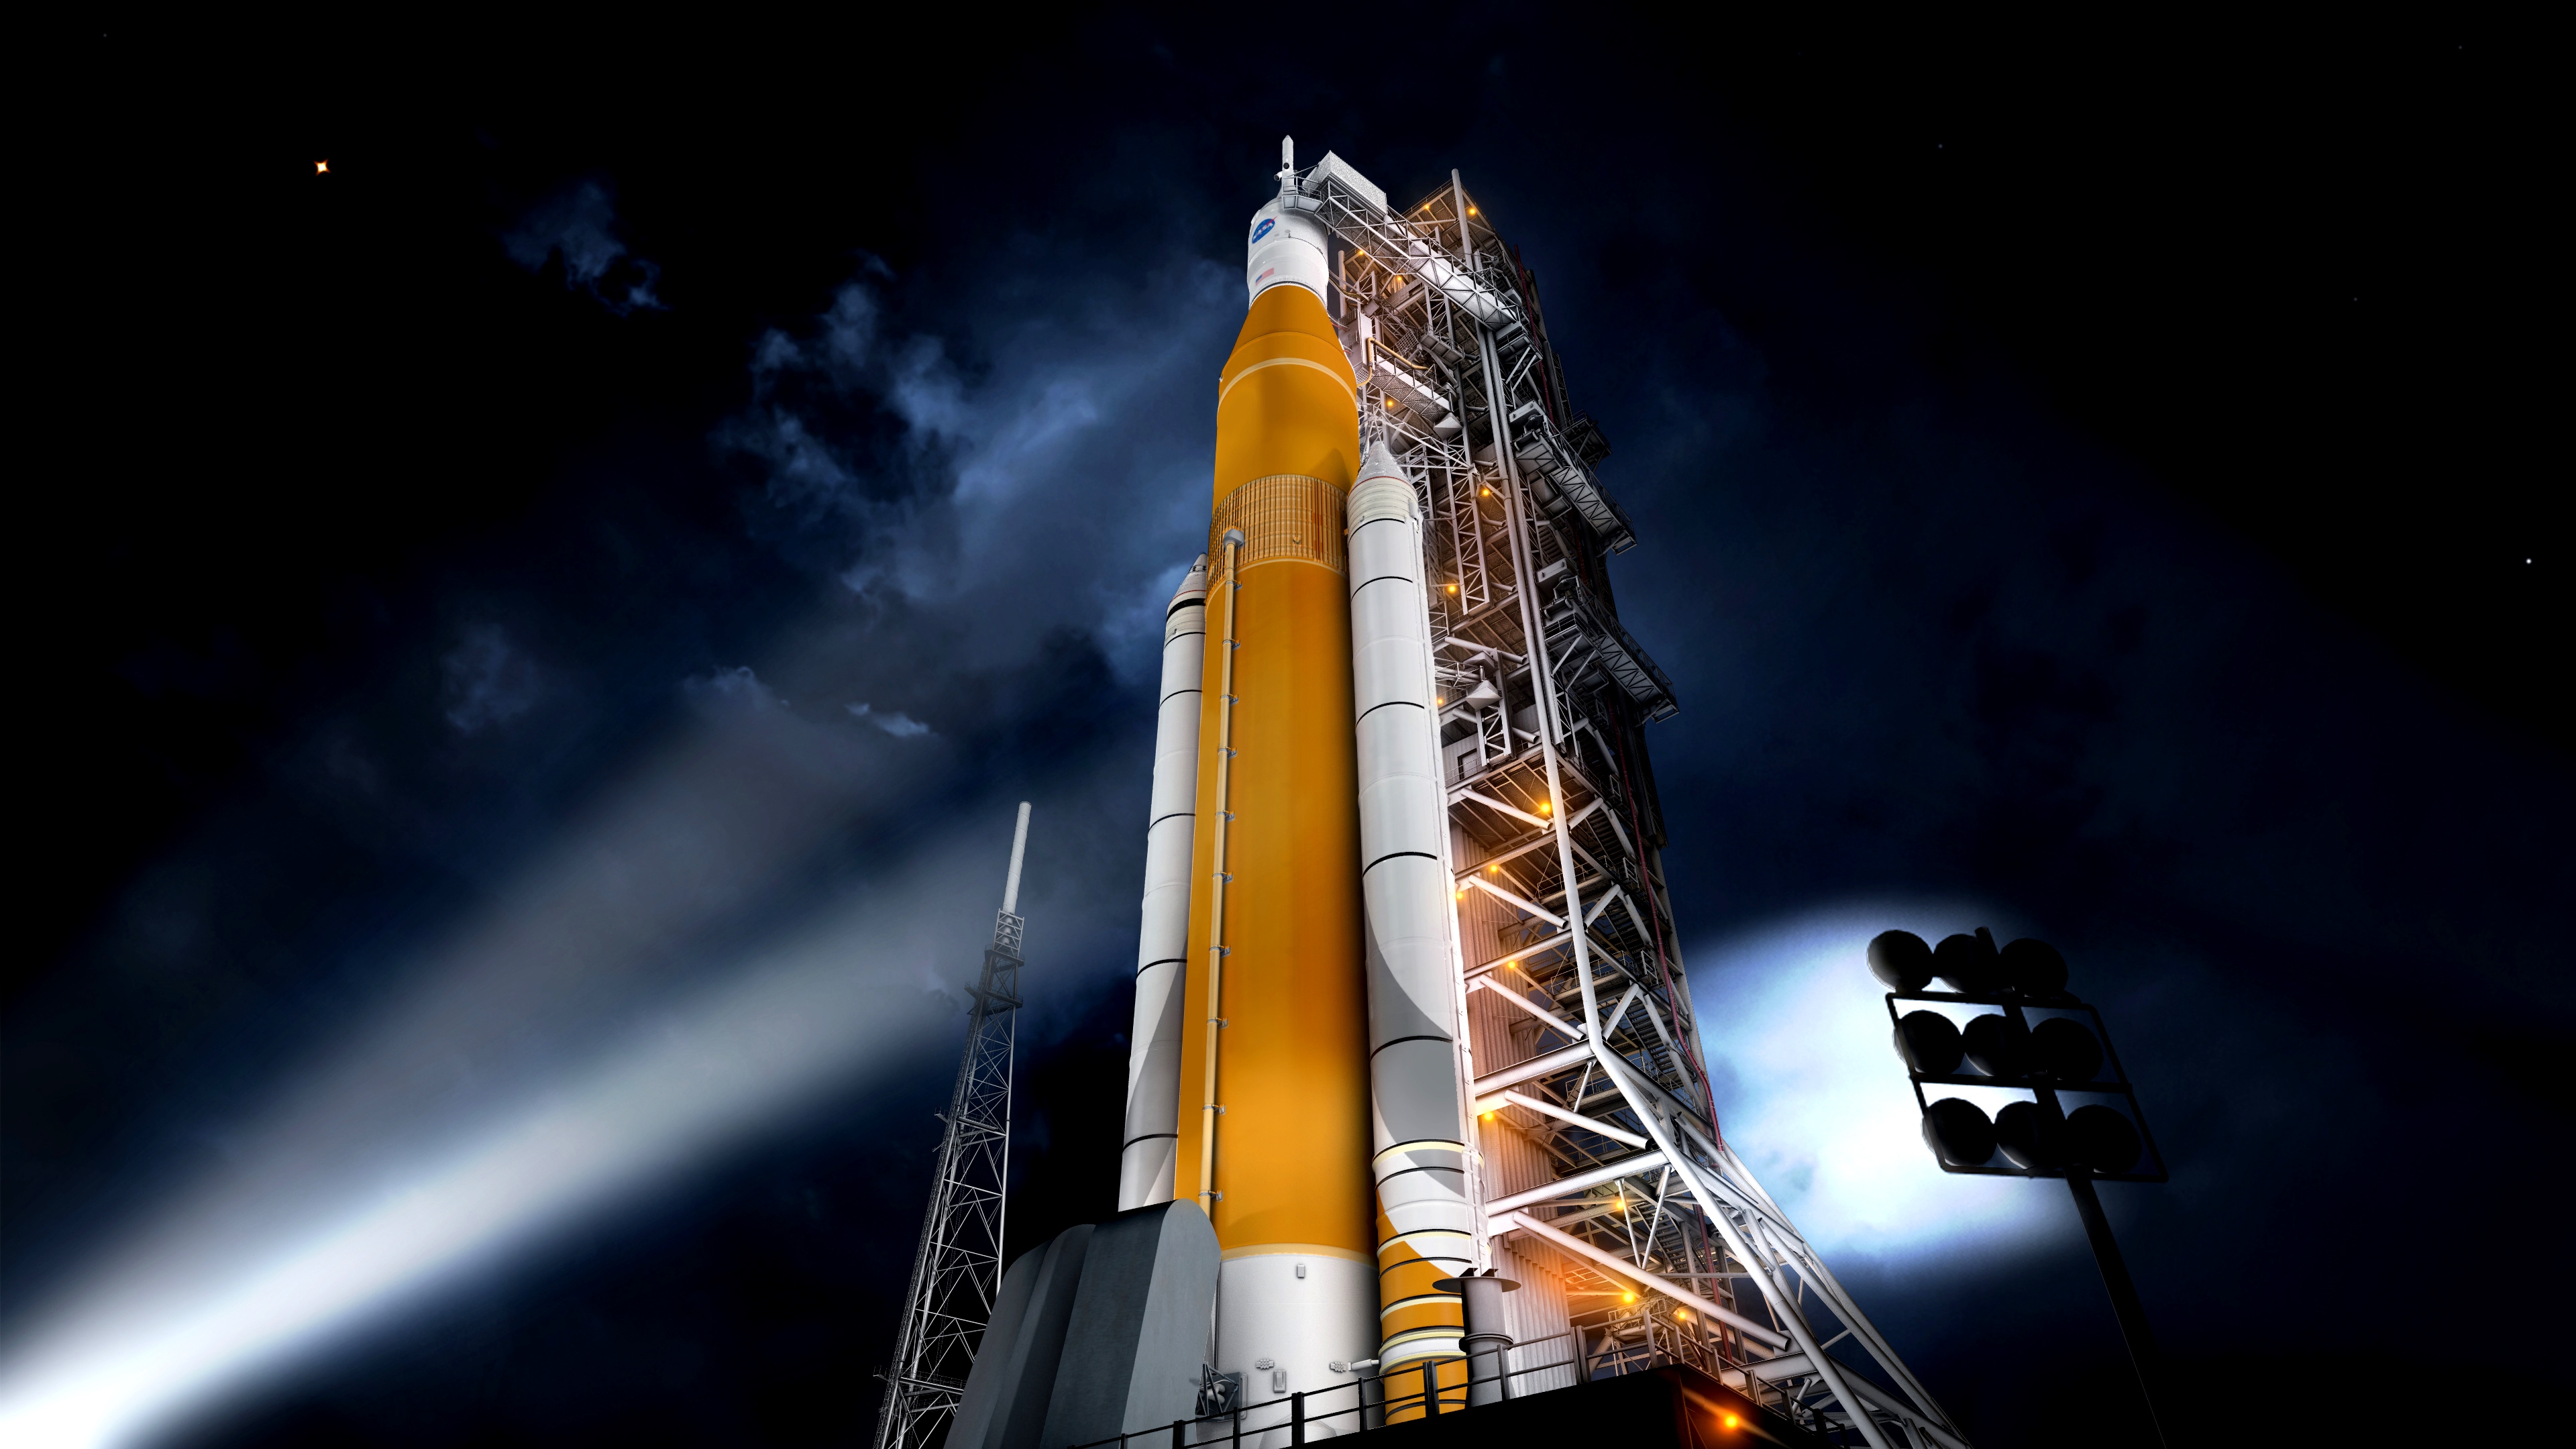 Artist's illustration of NASA's giant Space Launch System rocket on the launch pad.